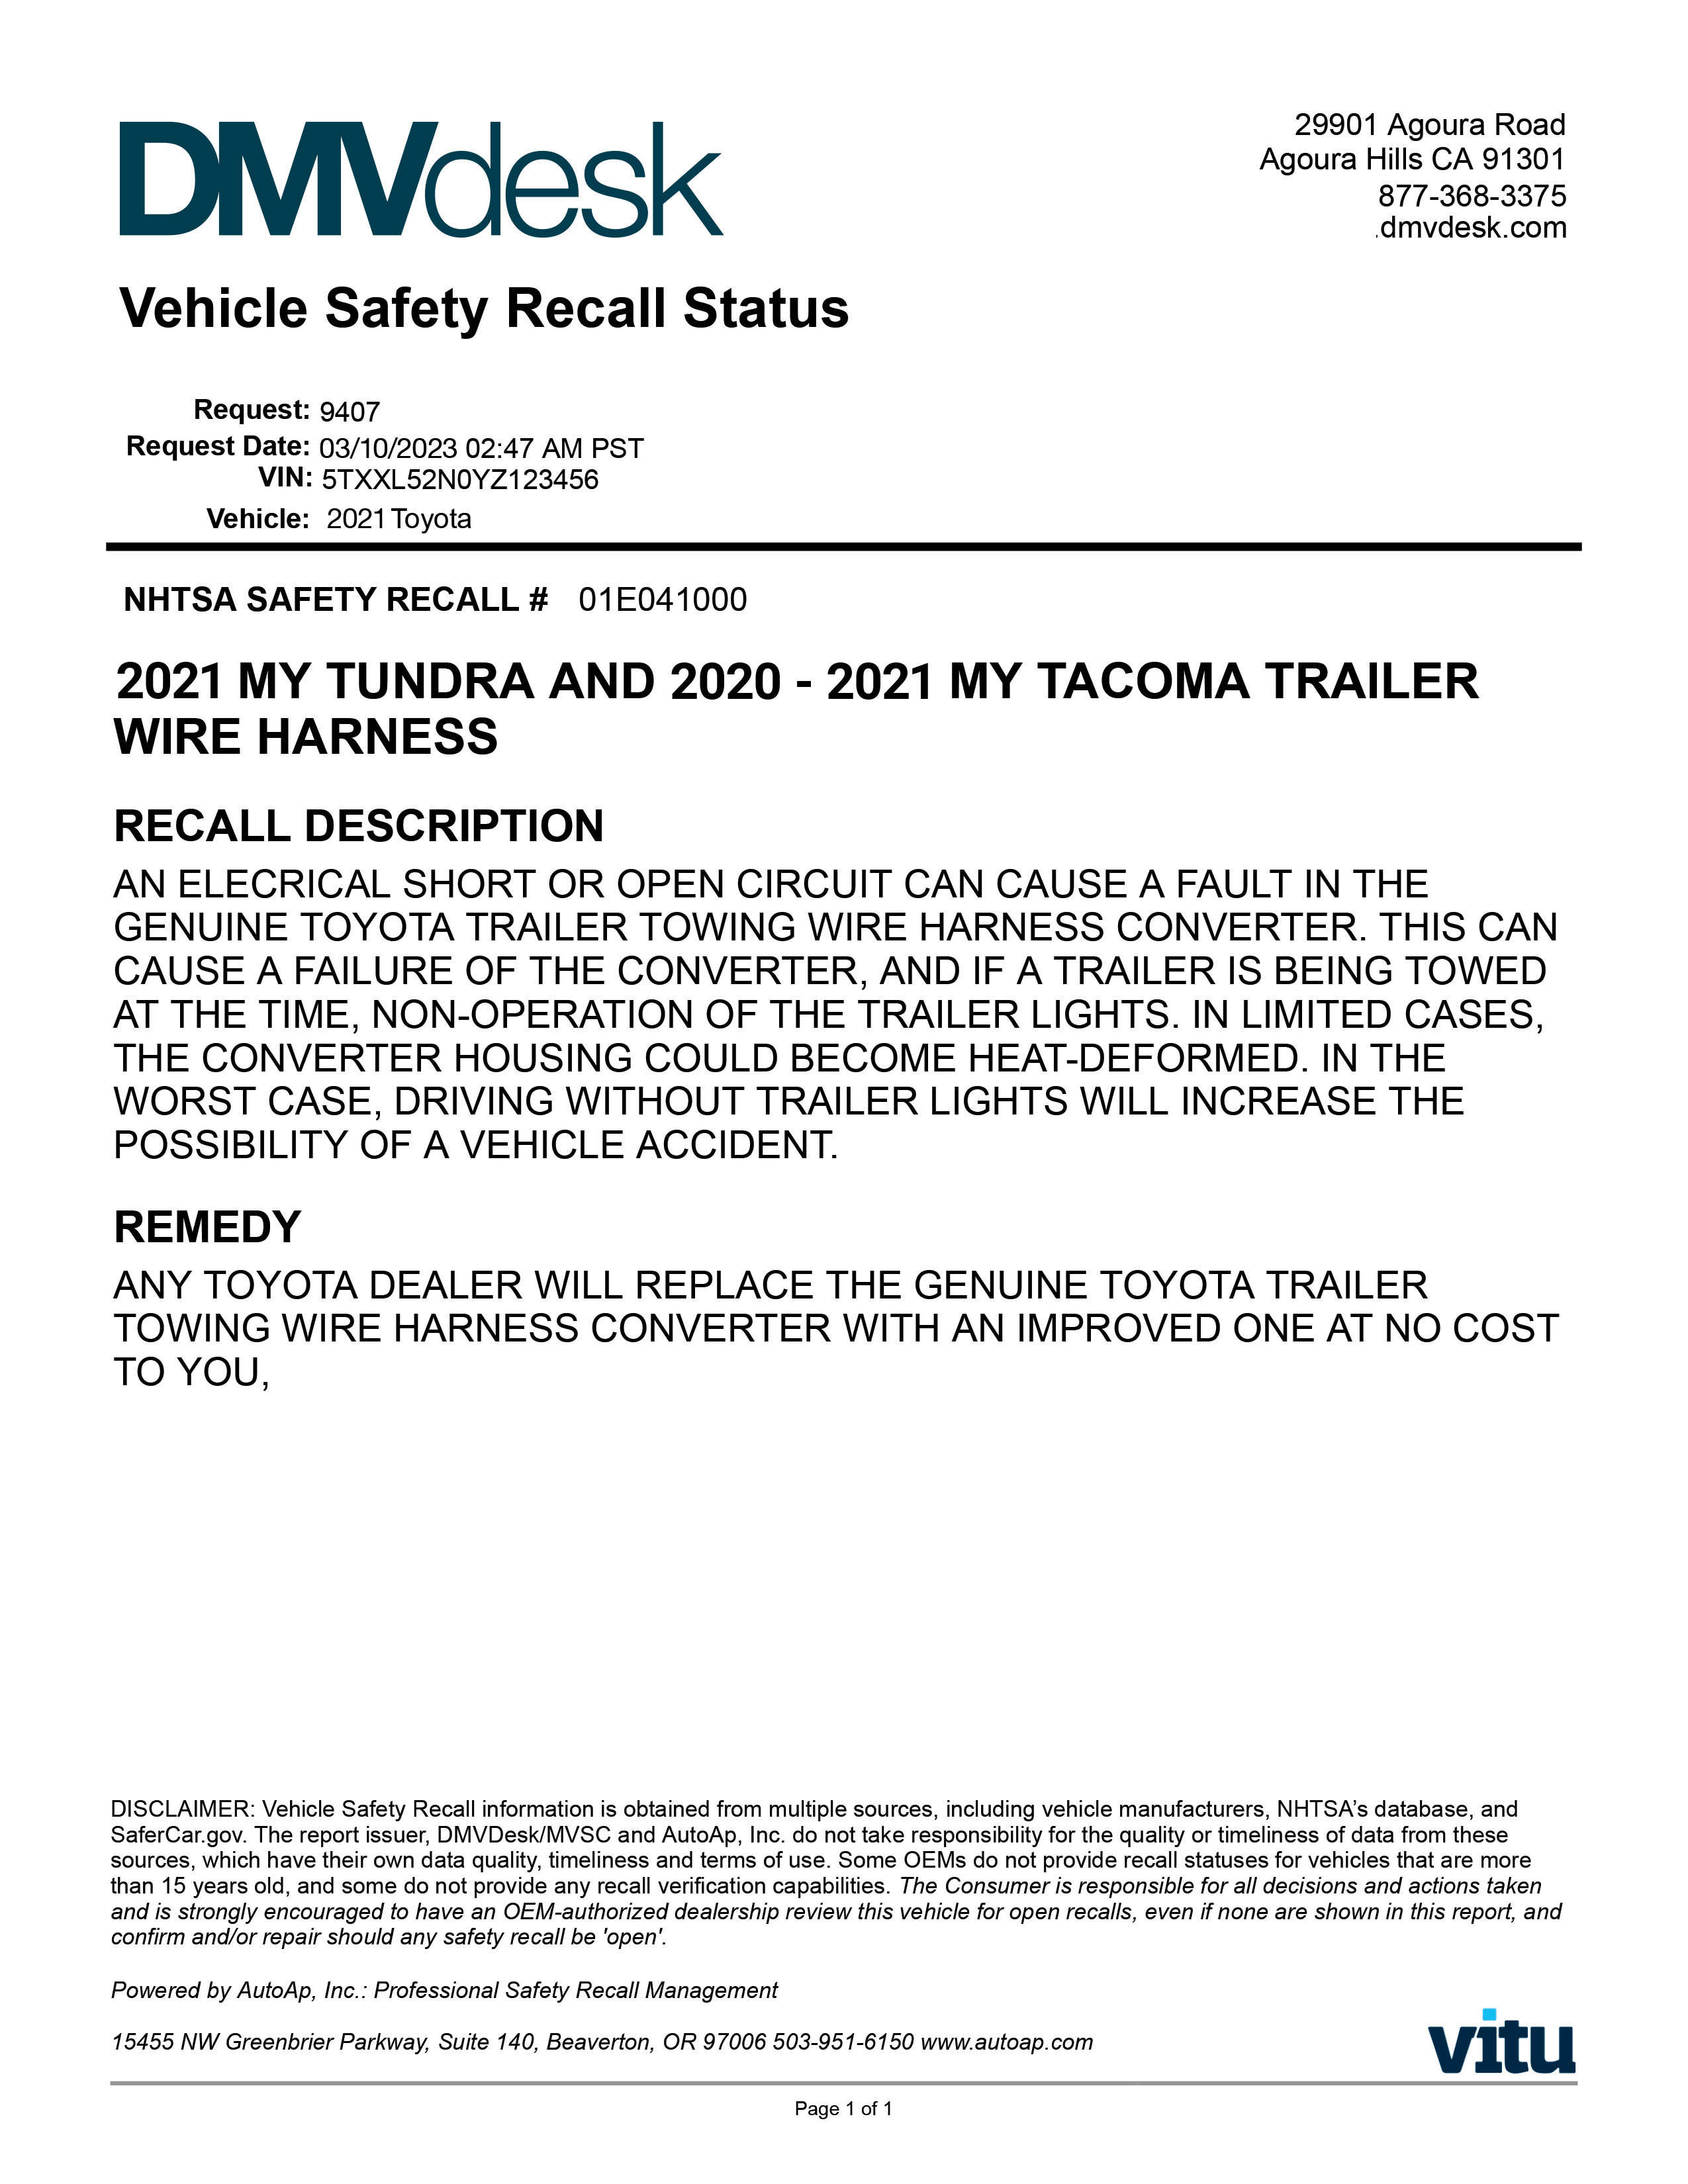 Safety Recall report